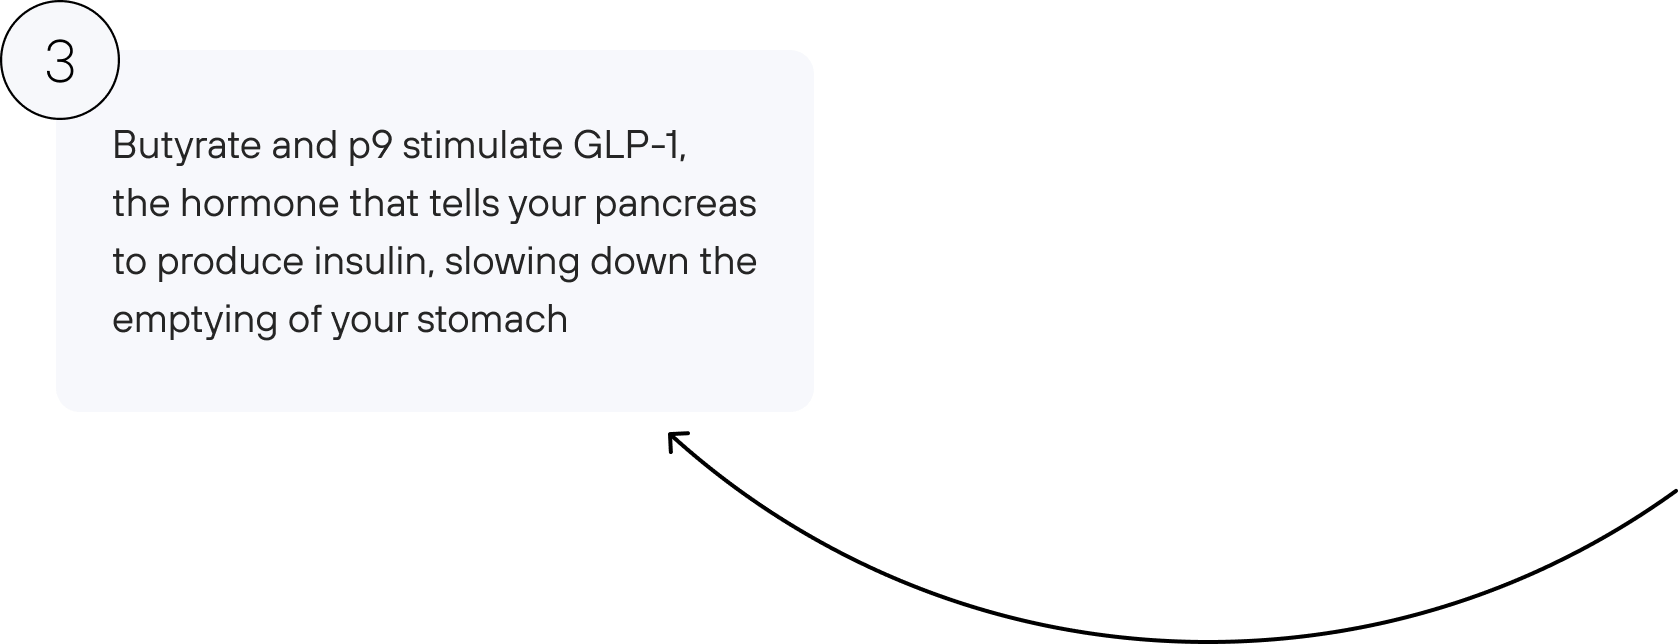 Butyrate and p9 stimulate GLP-1, the hormone that tells your pancreas to produce insulin, slowing down the emptying of your stomach